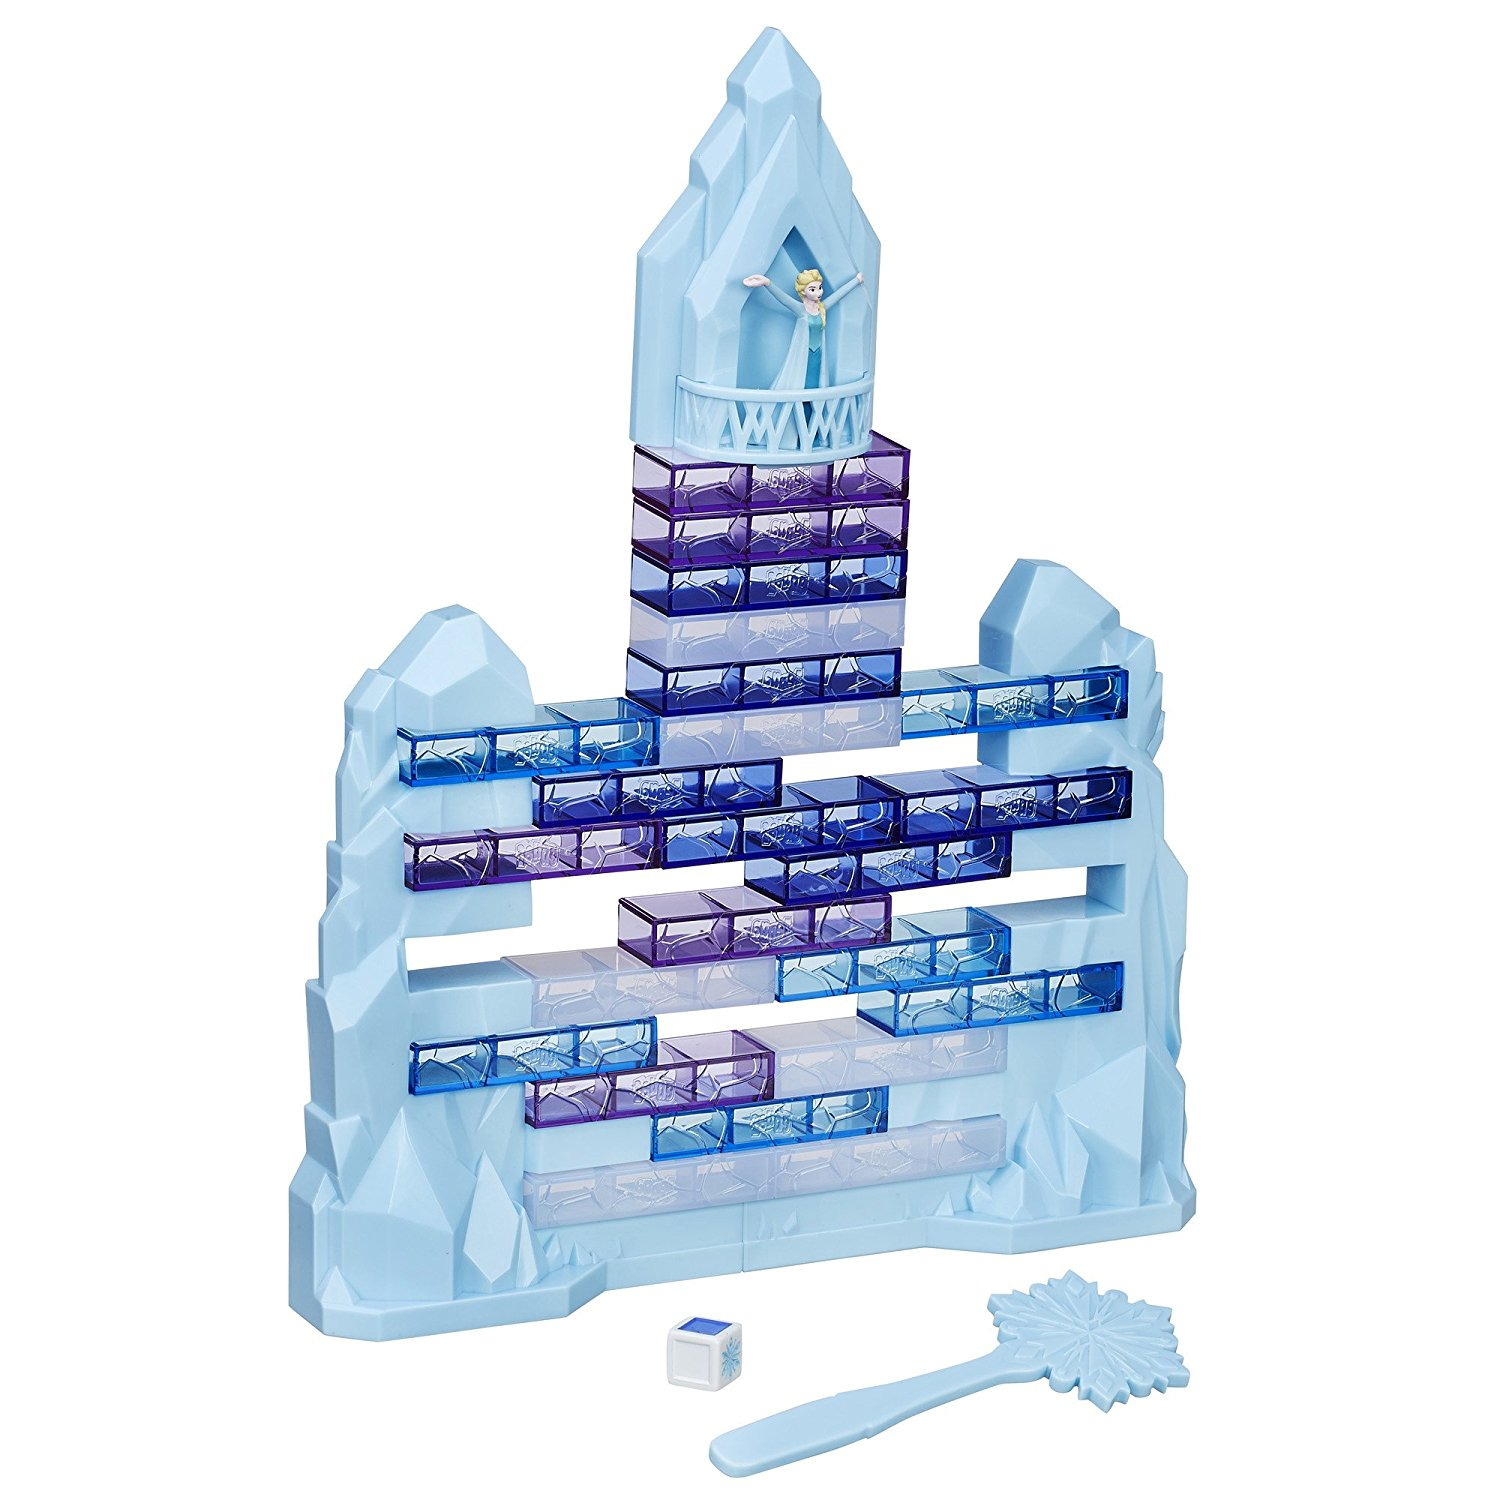 Save Big on the Jenga: Disney Frozen Edition Game – Now Just $8.00!